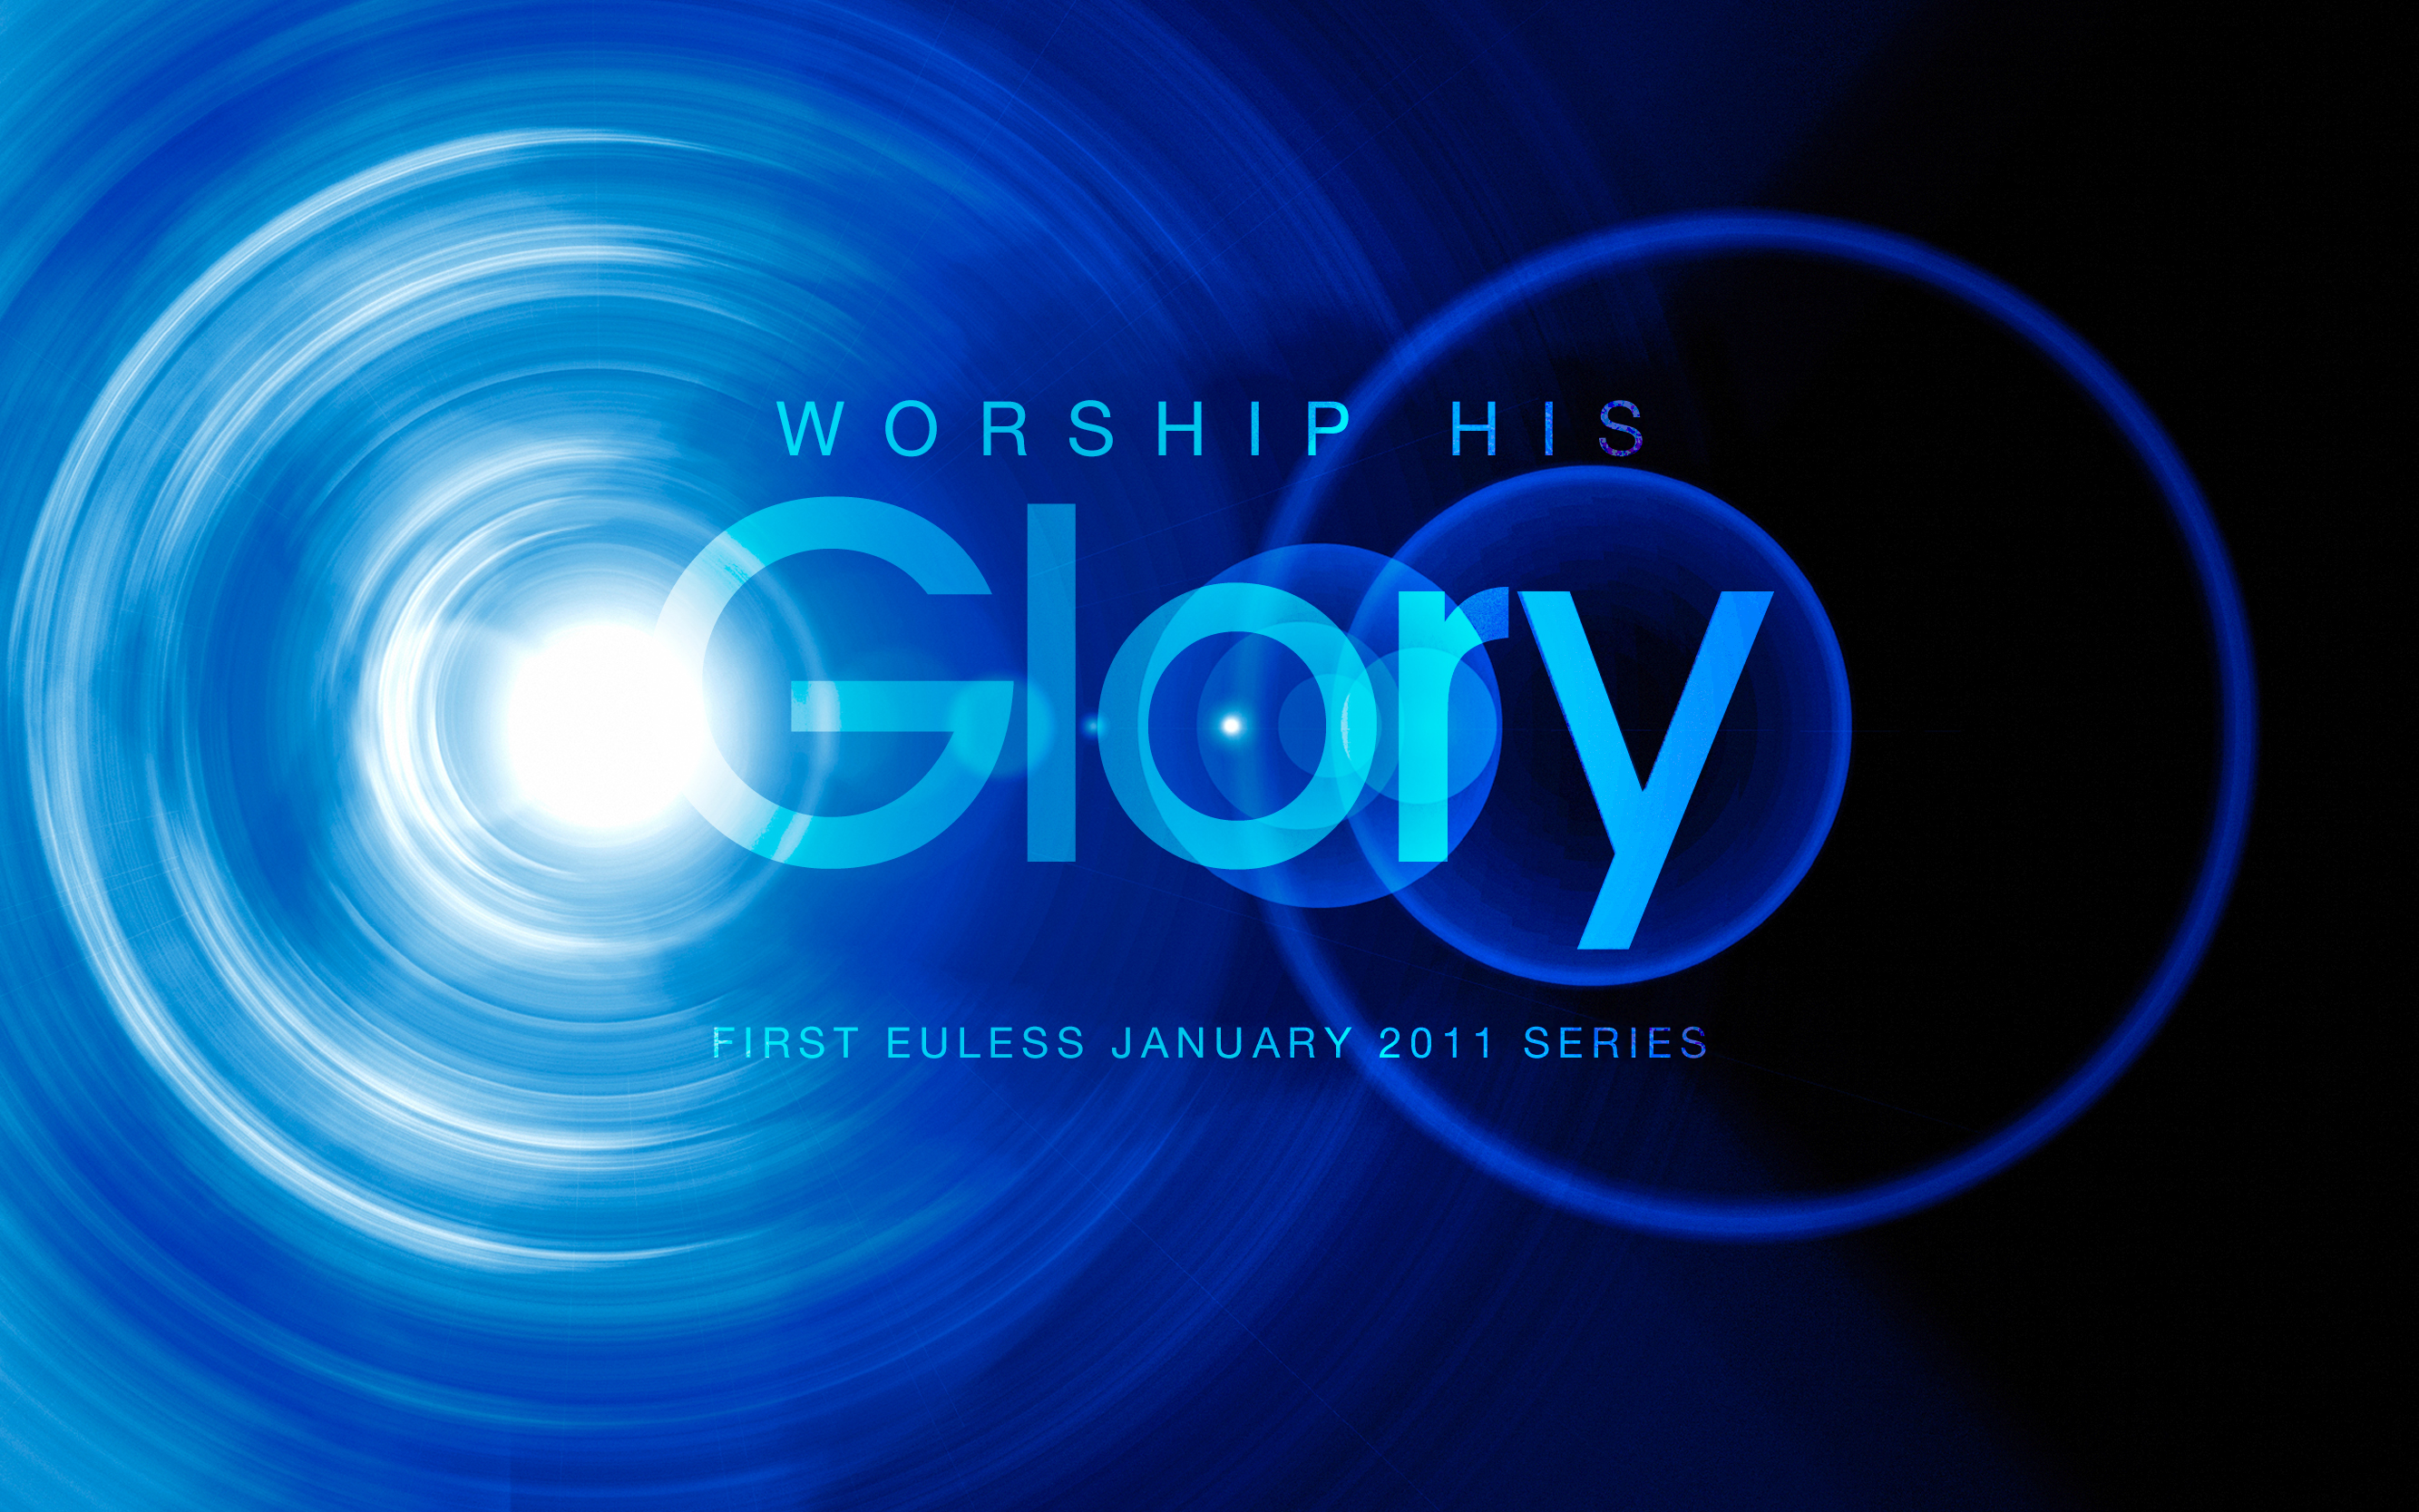 Worship His Glory Christian Wallpaper Free Download - Christian Hd Backgrounds Blue , HD Wallpaper & Backgrounds